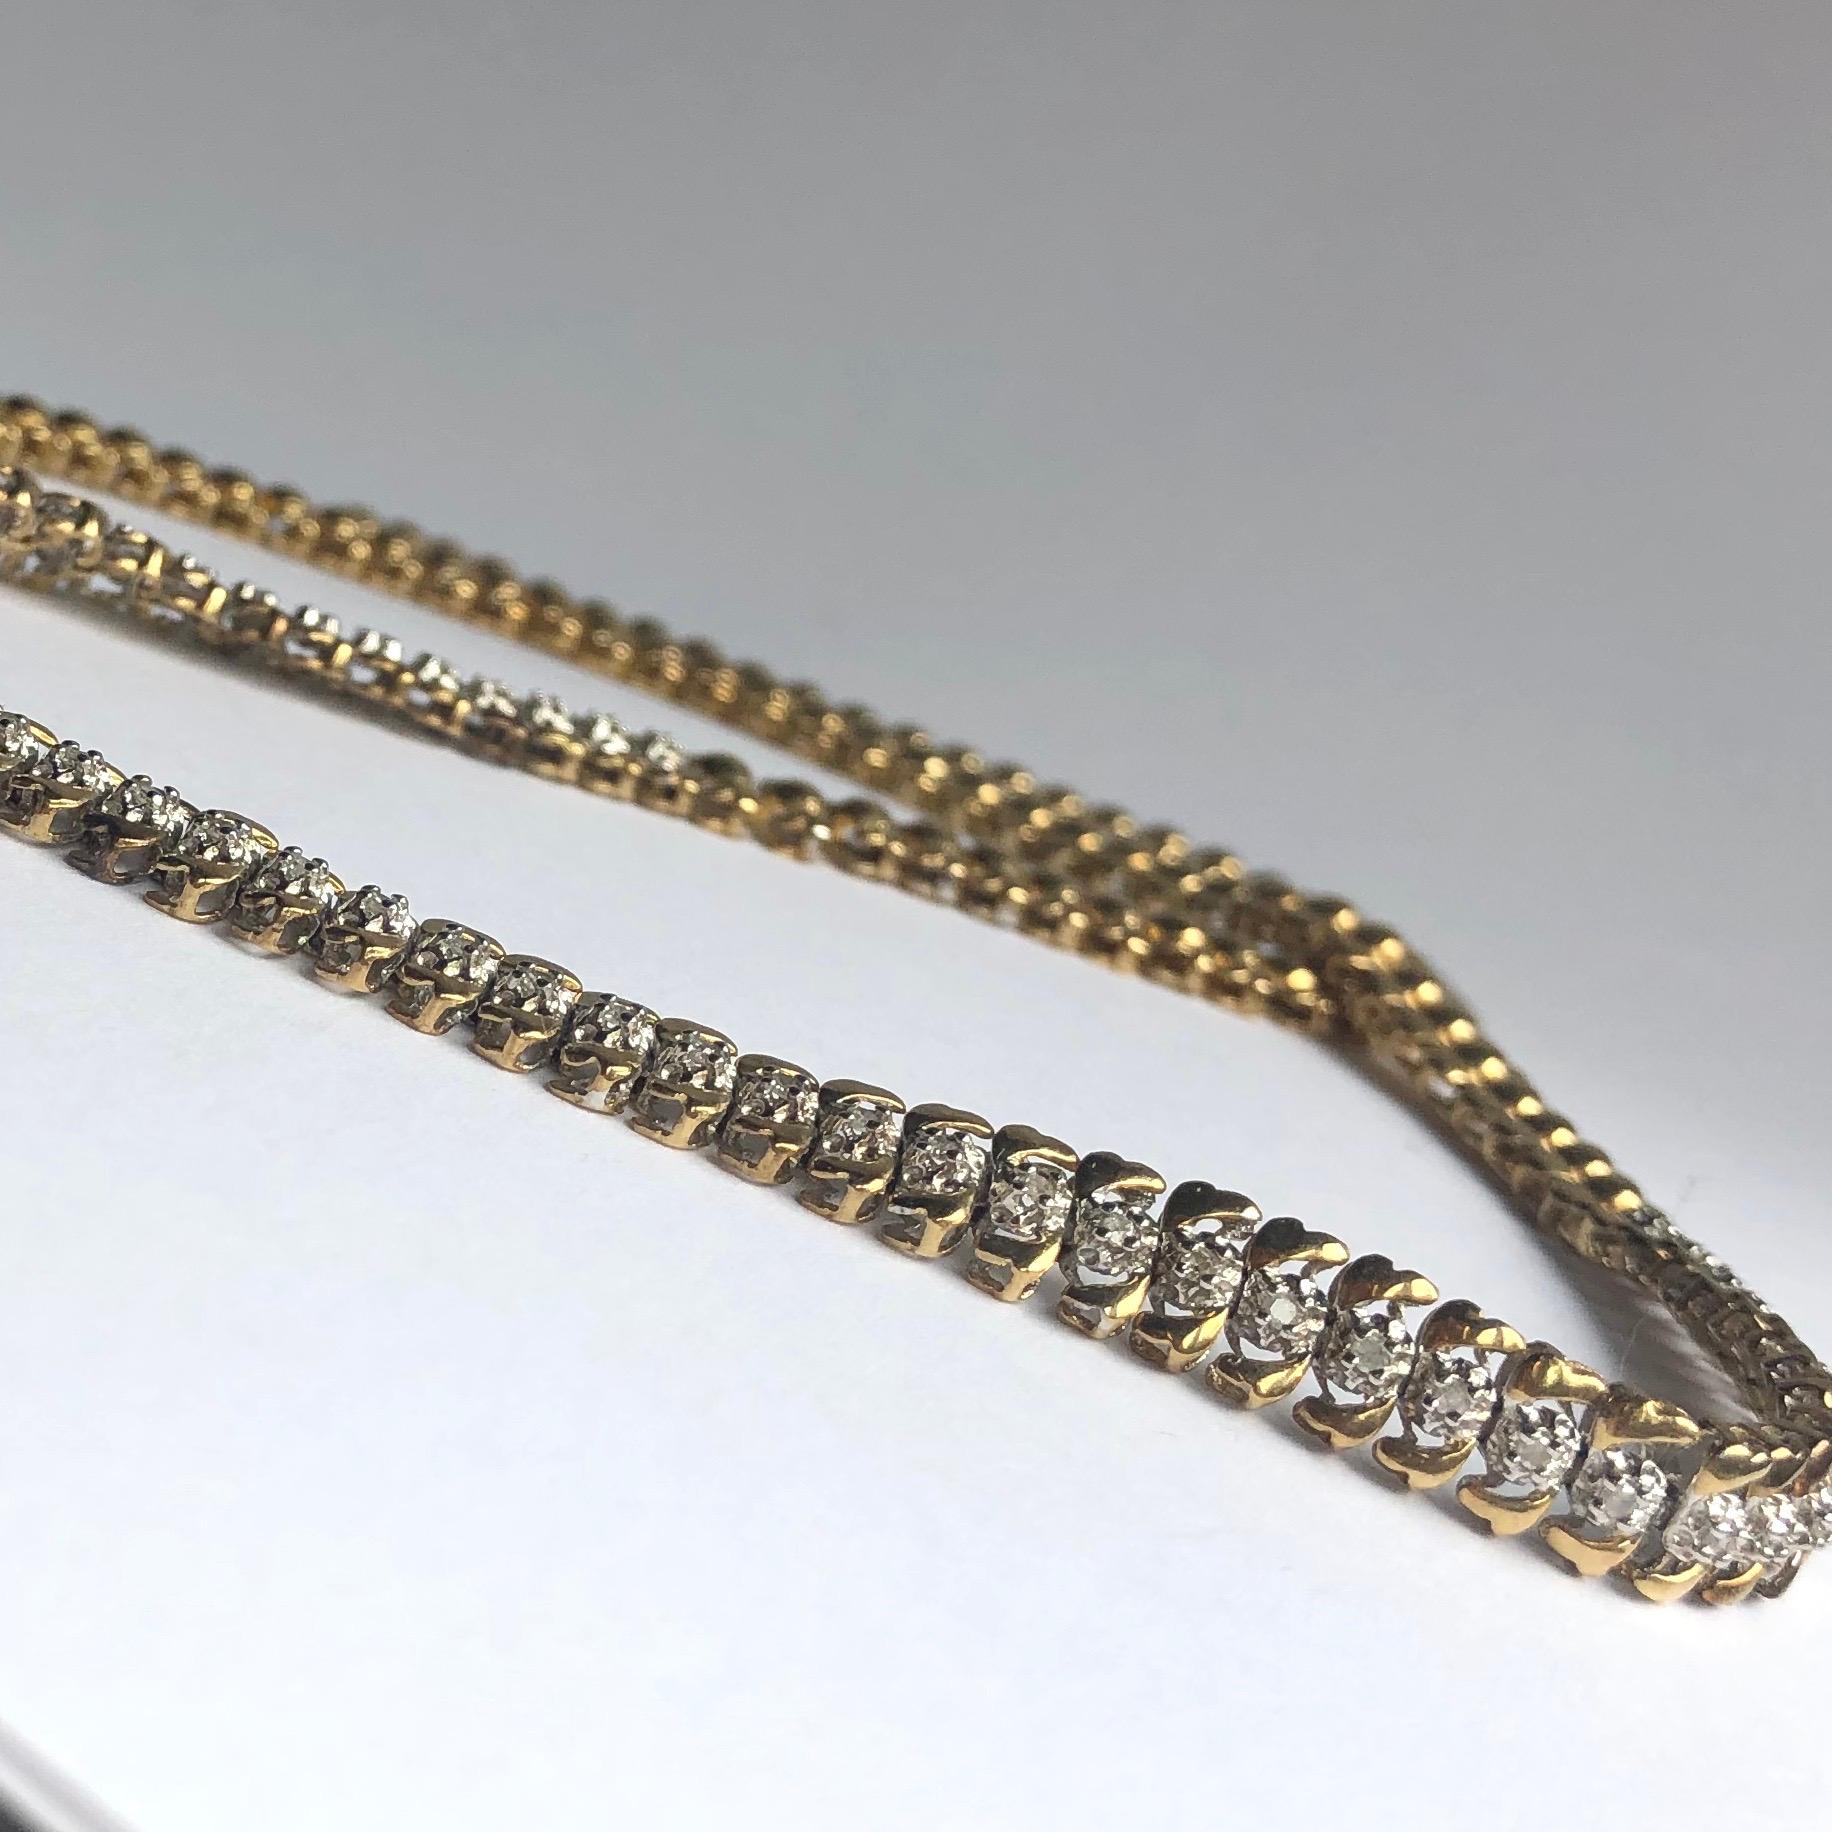 This beautiful 9ct gold collar has a central line of diamonds set in platinum. The total carat weight is 1.24carat. The chain is detailed and looks great even worn alone! It is fastened using an invisible clasp so the chain just keeps going round